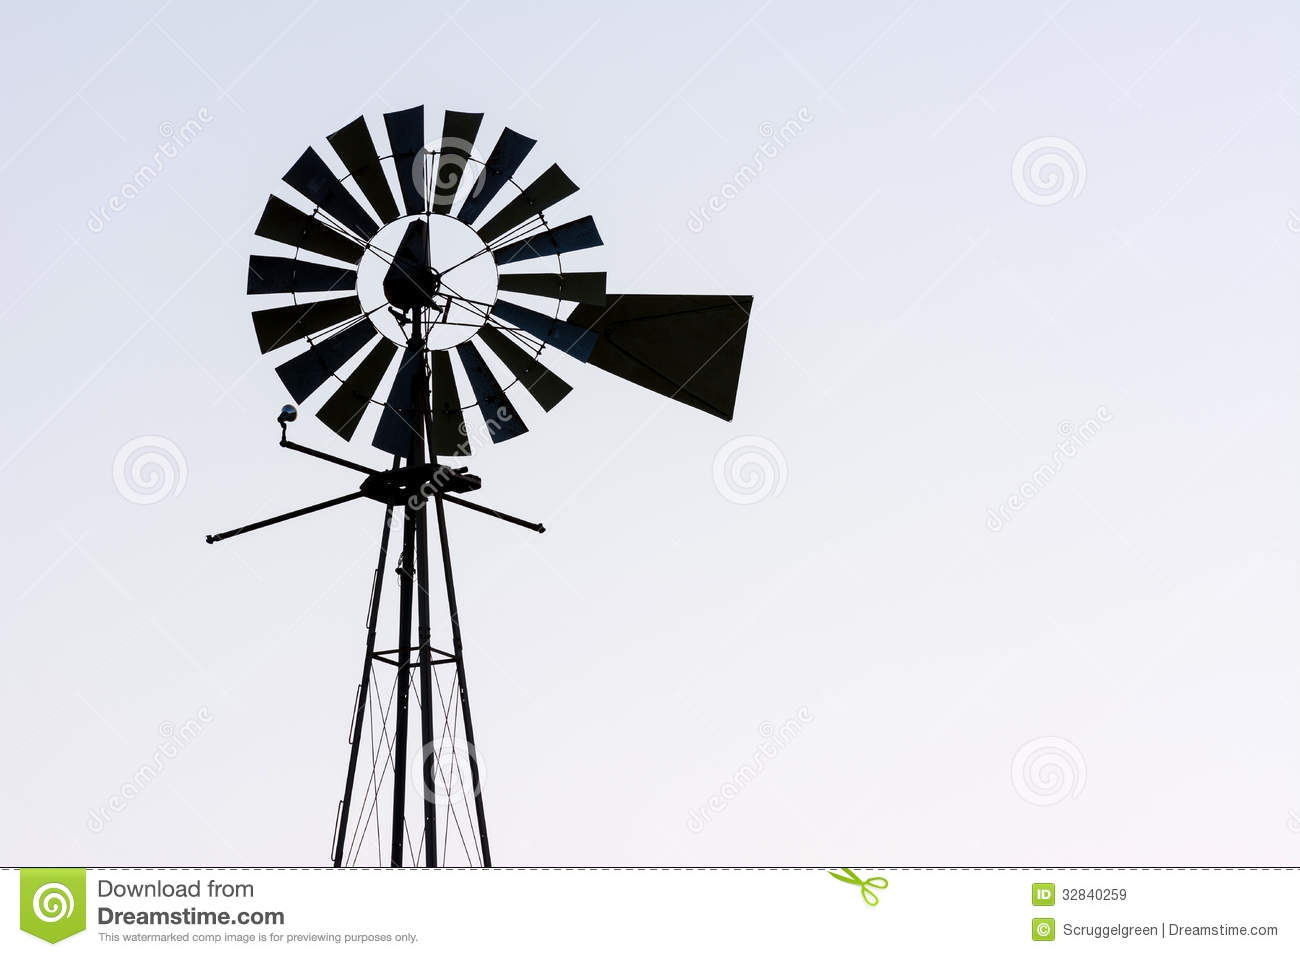 Windmill Royalty Free Stock Images   Image  32840259